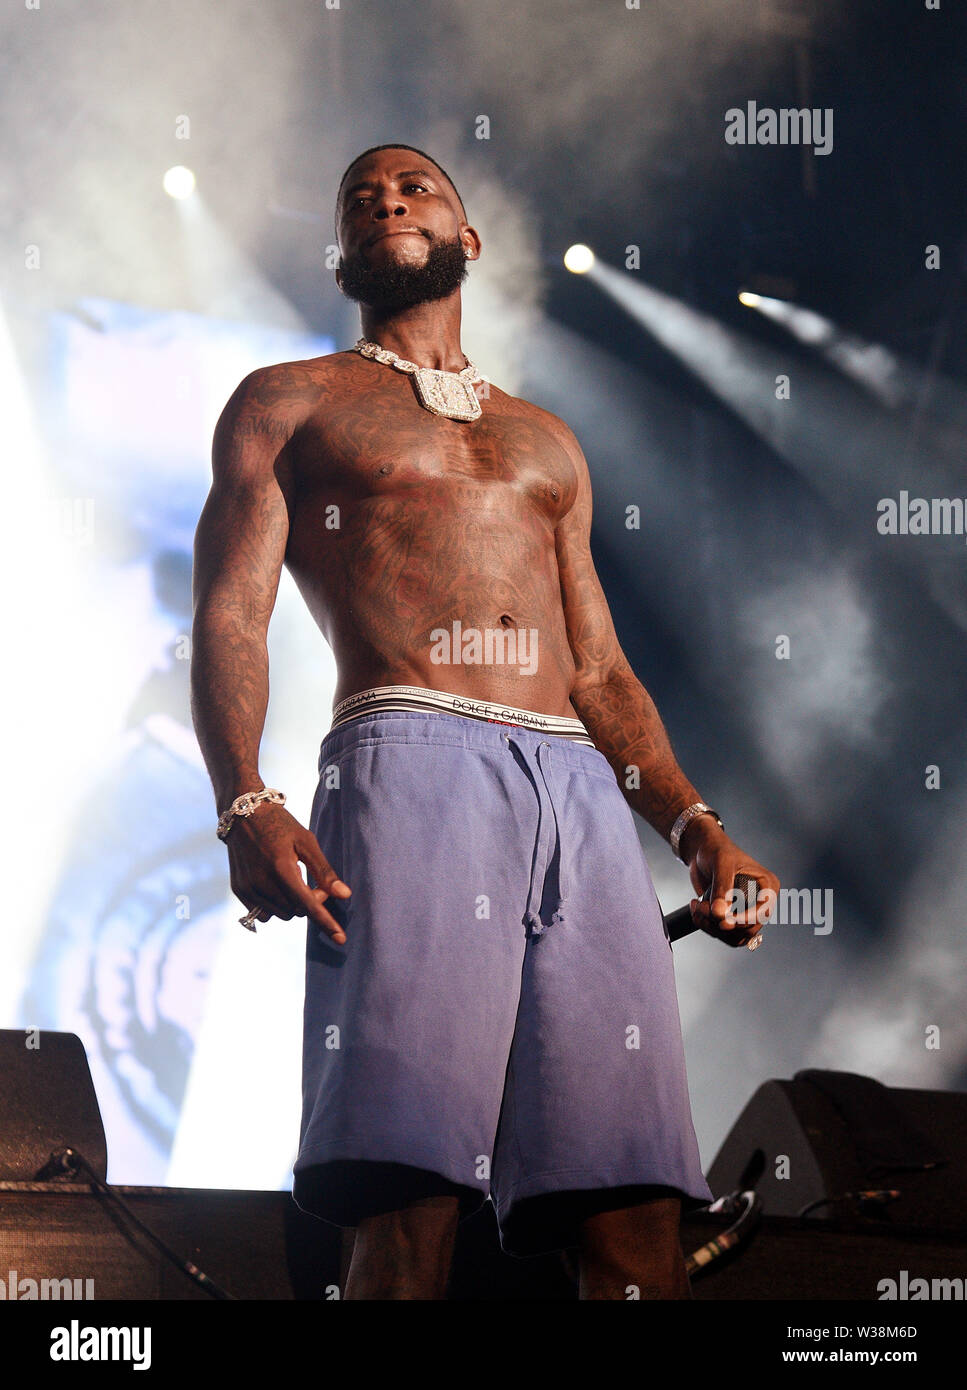 Quebec, Canada. 12th July, 2019. QUEBEC CITY, QC - JULY 12: Gucci Mane  performs at the Festival d'été de Québec on July 12, 2019 in Quebec City,  Canada. Photo: imageSPACE/MediaPunch Credit: MediaPunch